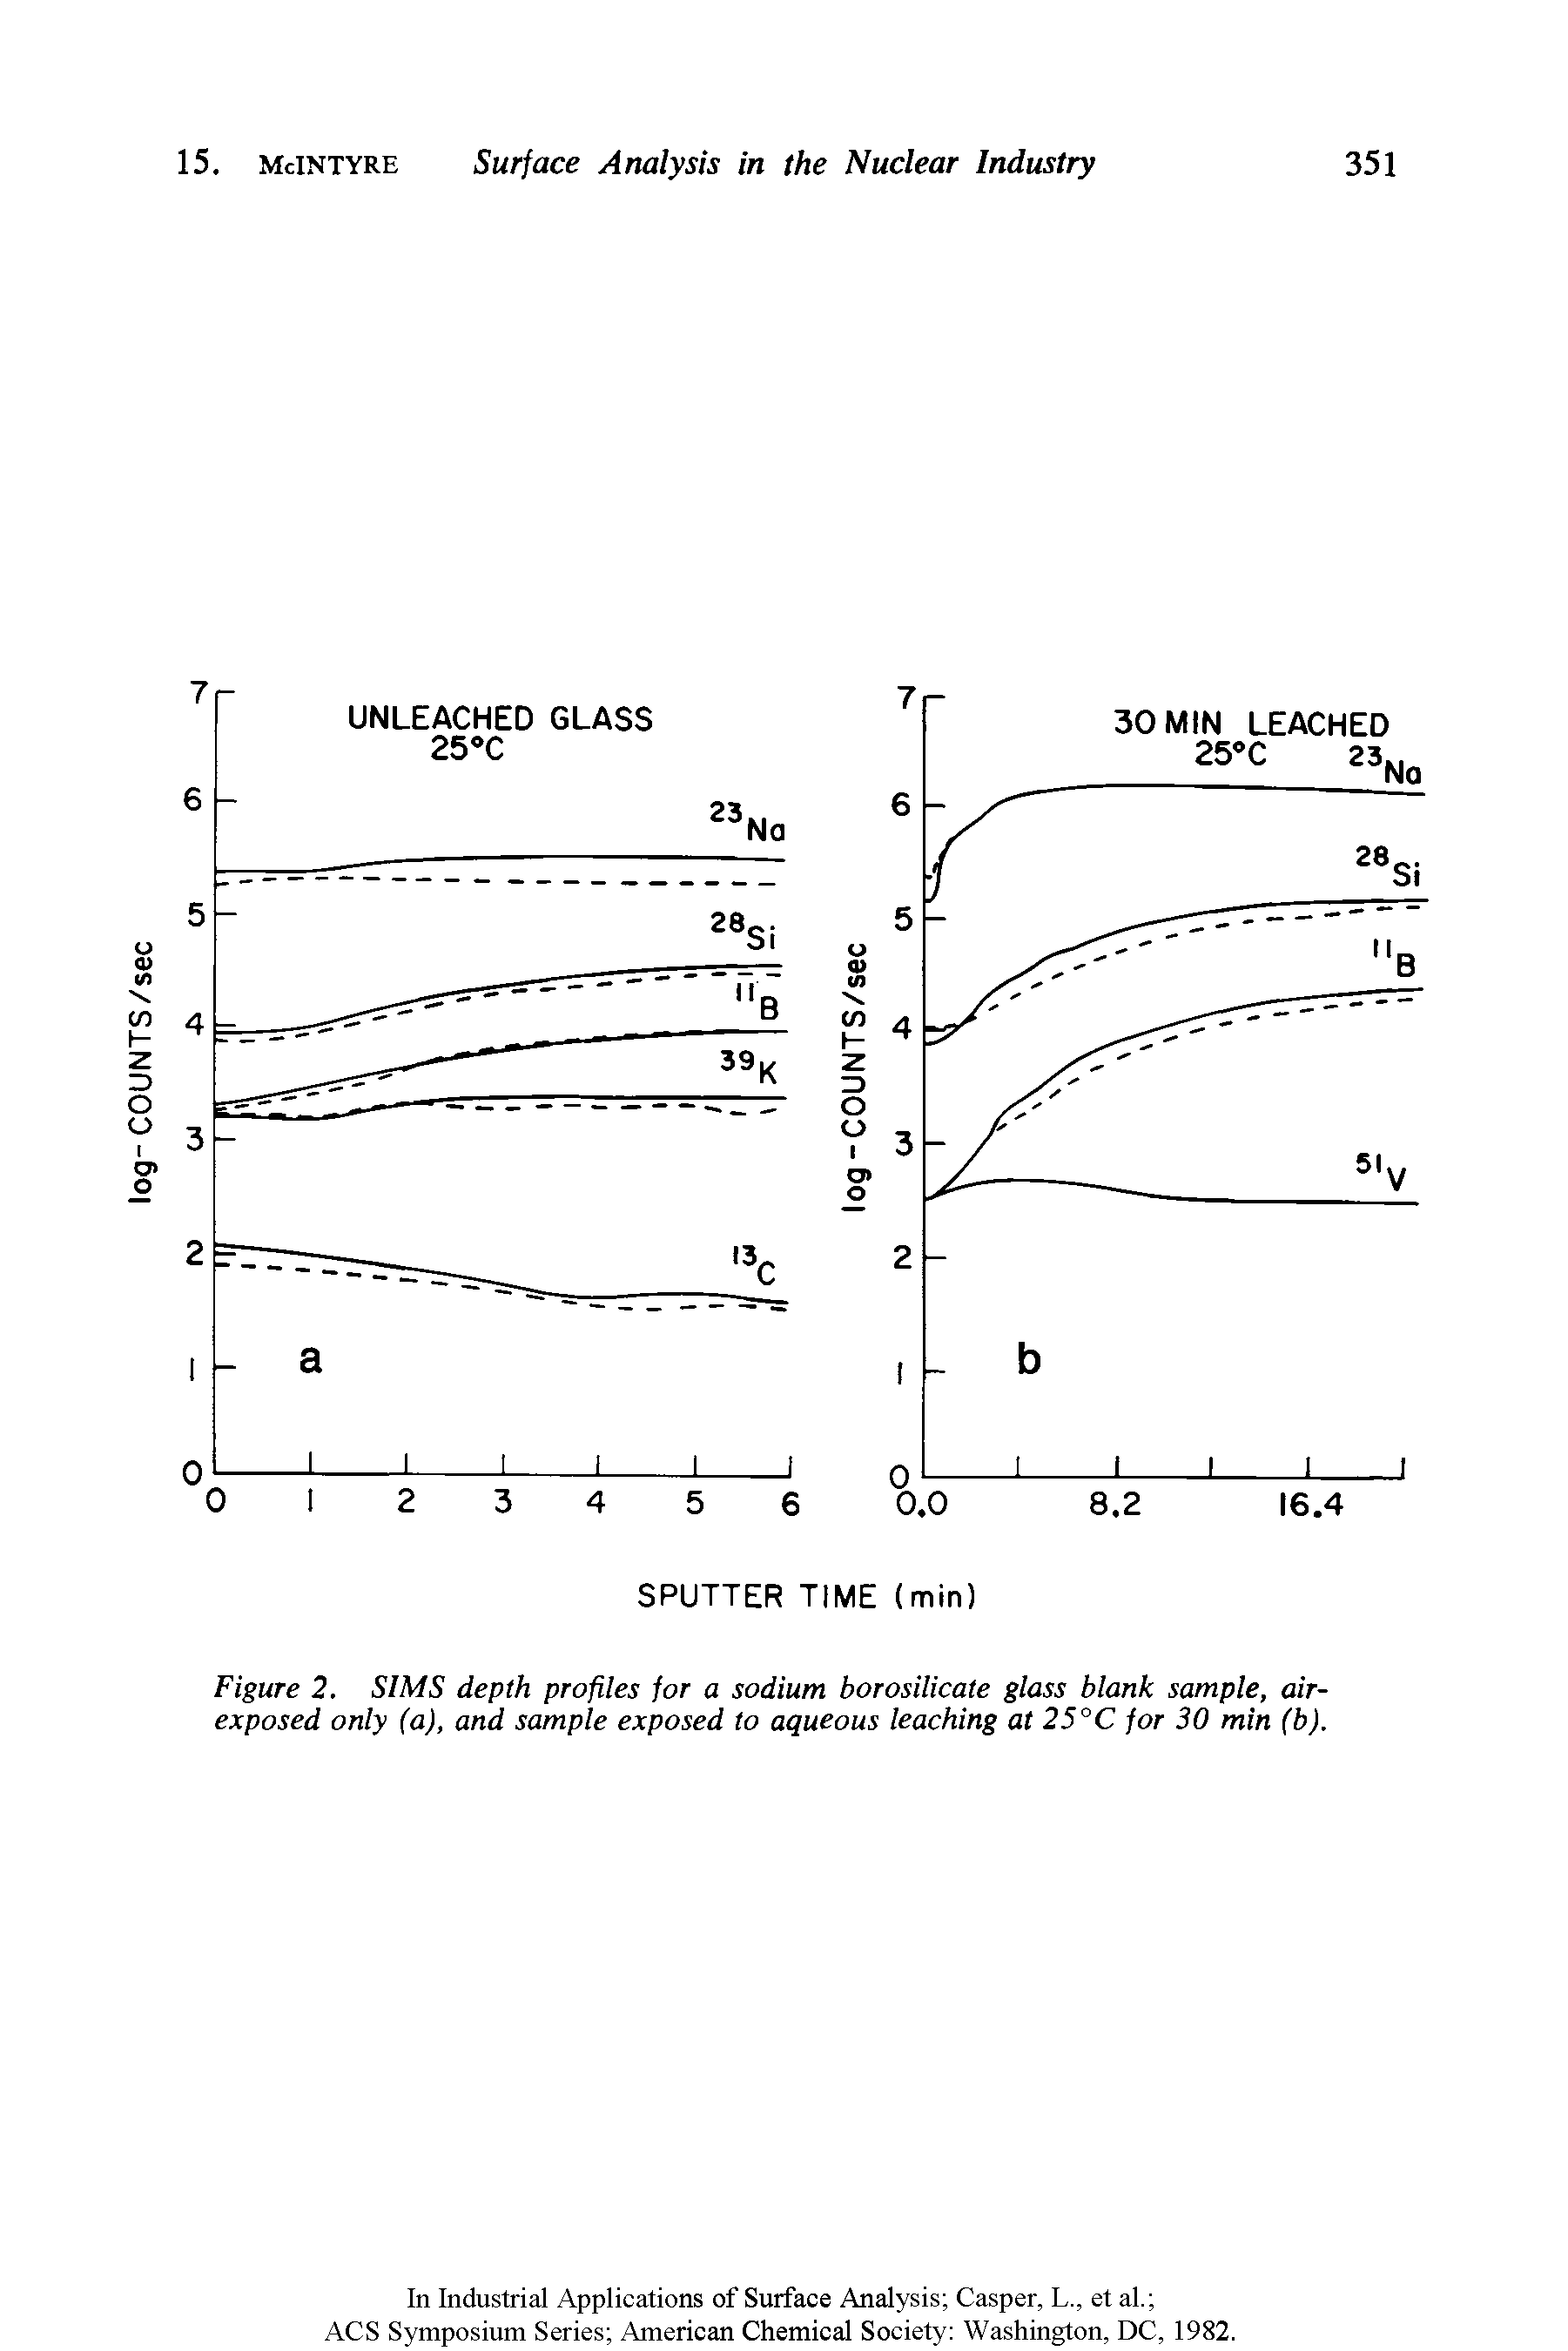 Figure 2. SIMS depth profiles for a sodium borosilicate glass blank sample, air-exposed only (a), and sample exposed to aqueous leaching at 25°C for 30 min (b).